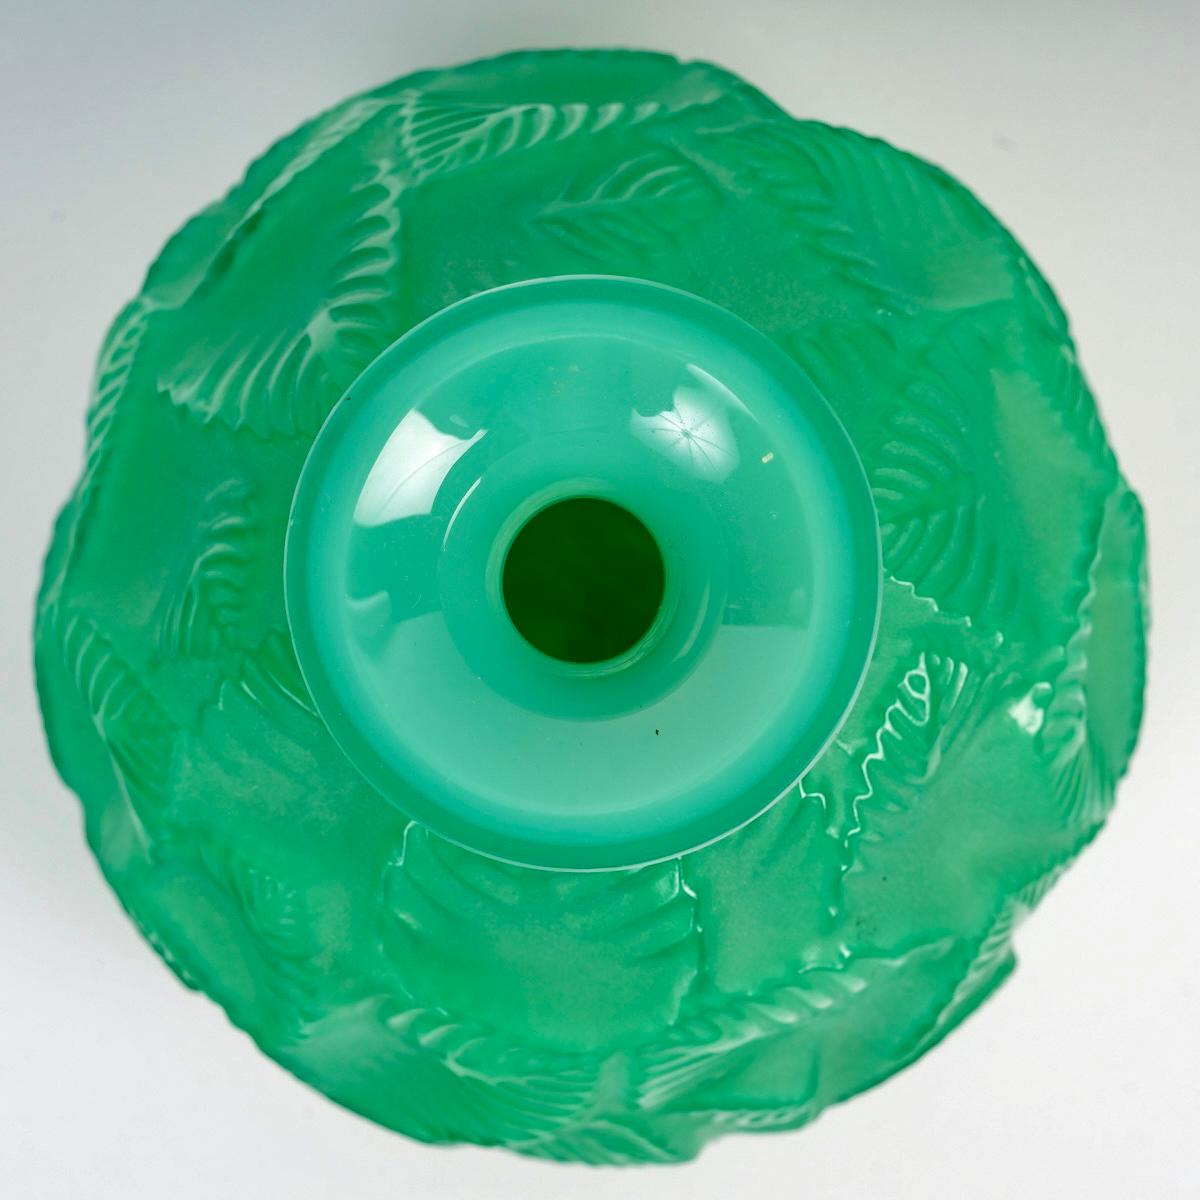 French 1926 René Lalique, Vase Ormeaux Cased Jade Green Glass